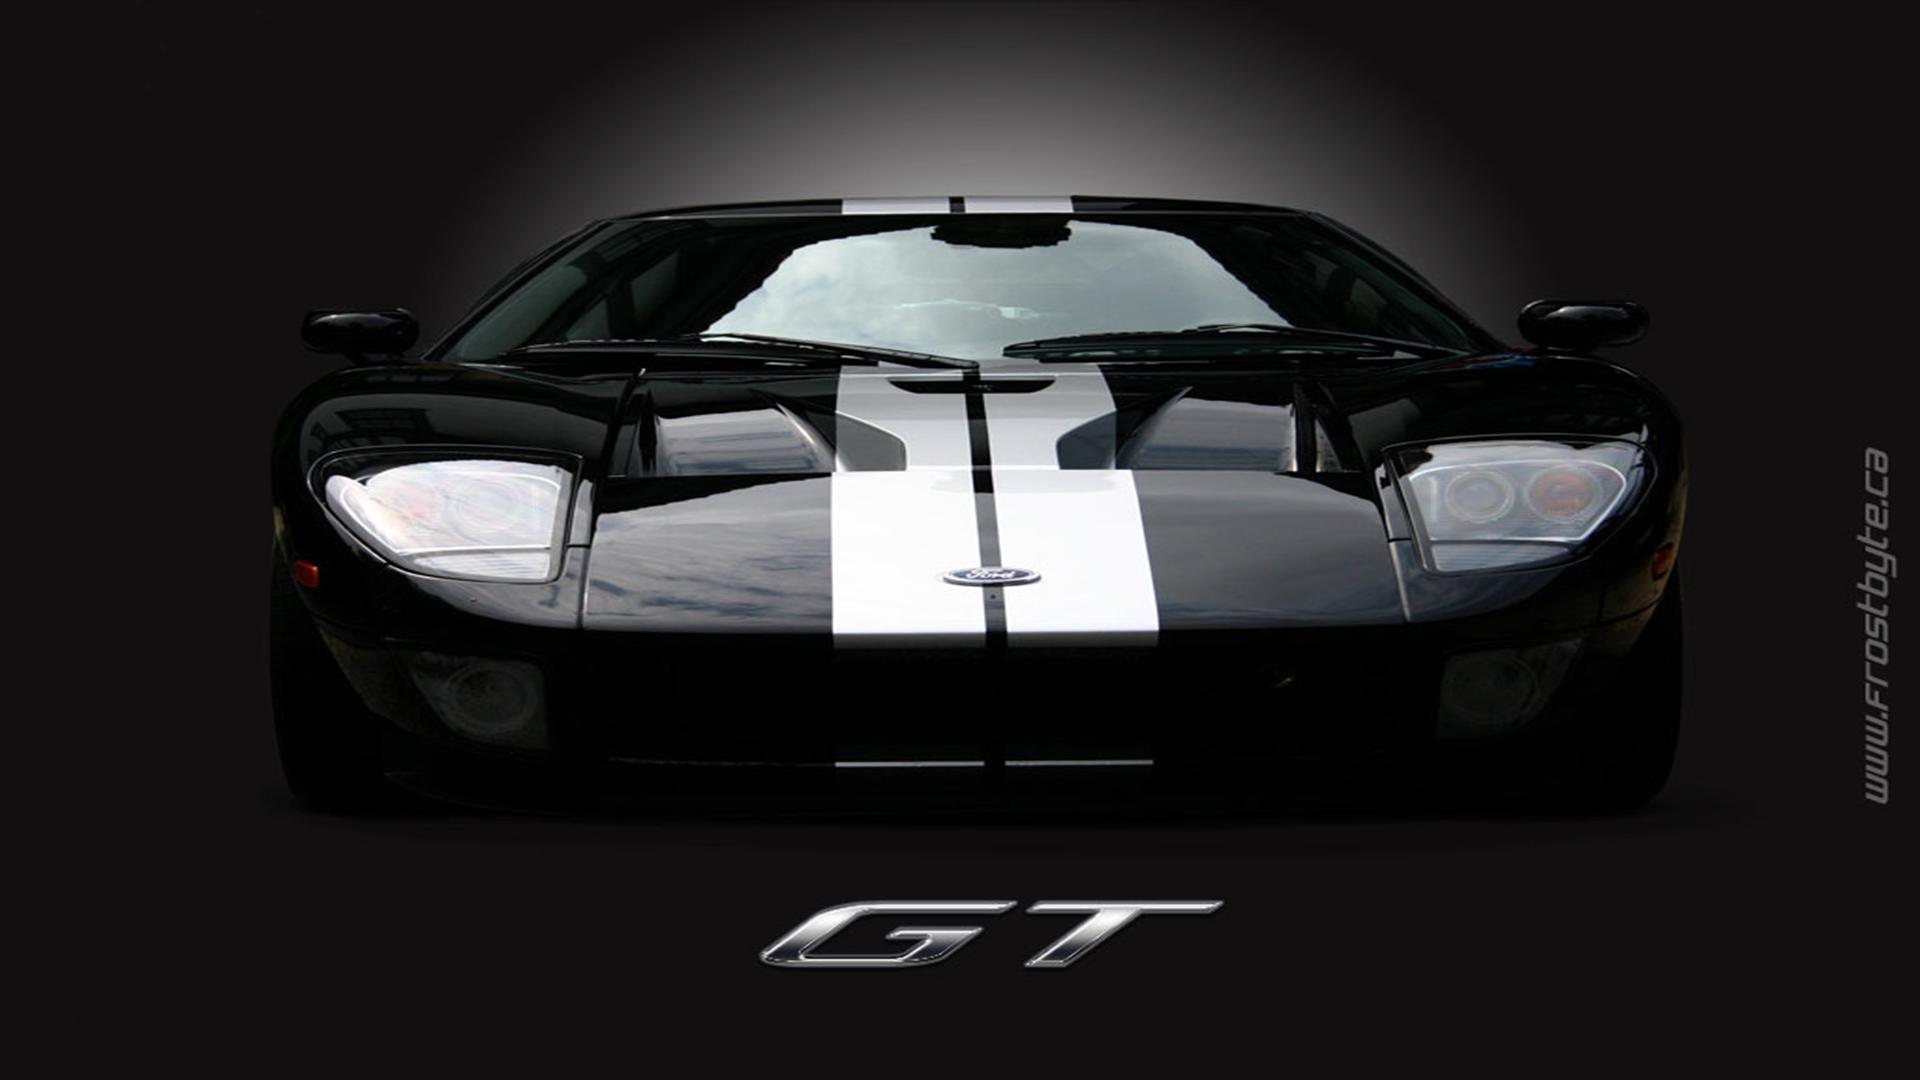 Ford Gt Exotic Wallpaper 1080p HD High Resolution Image